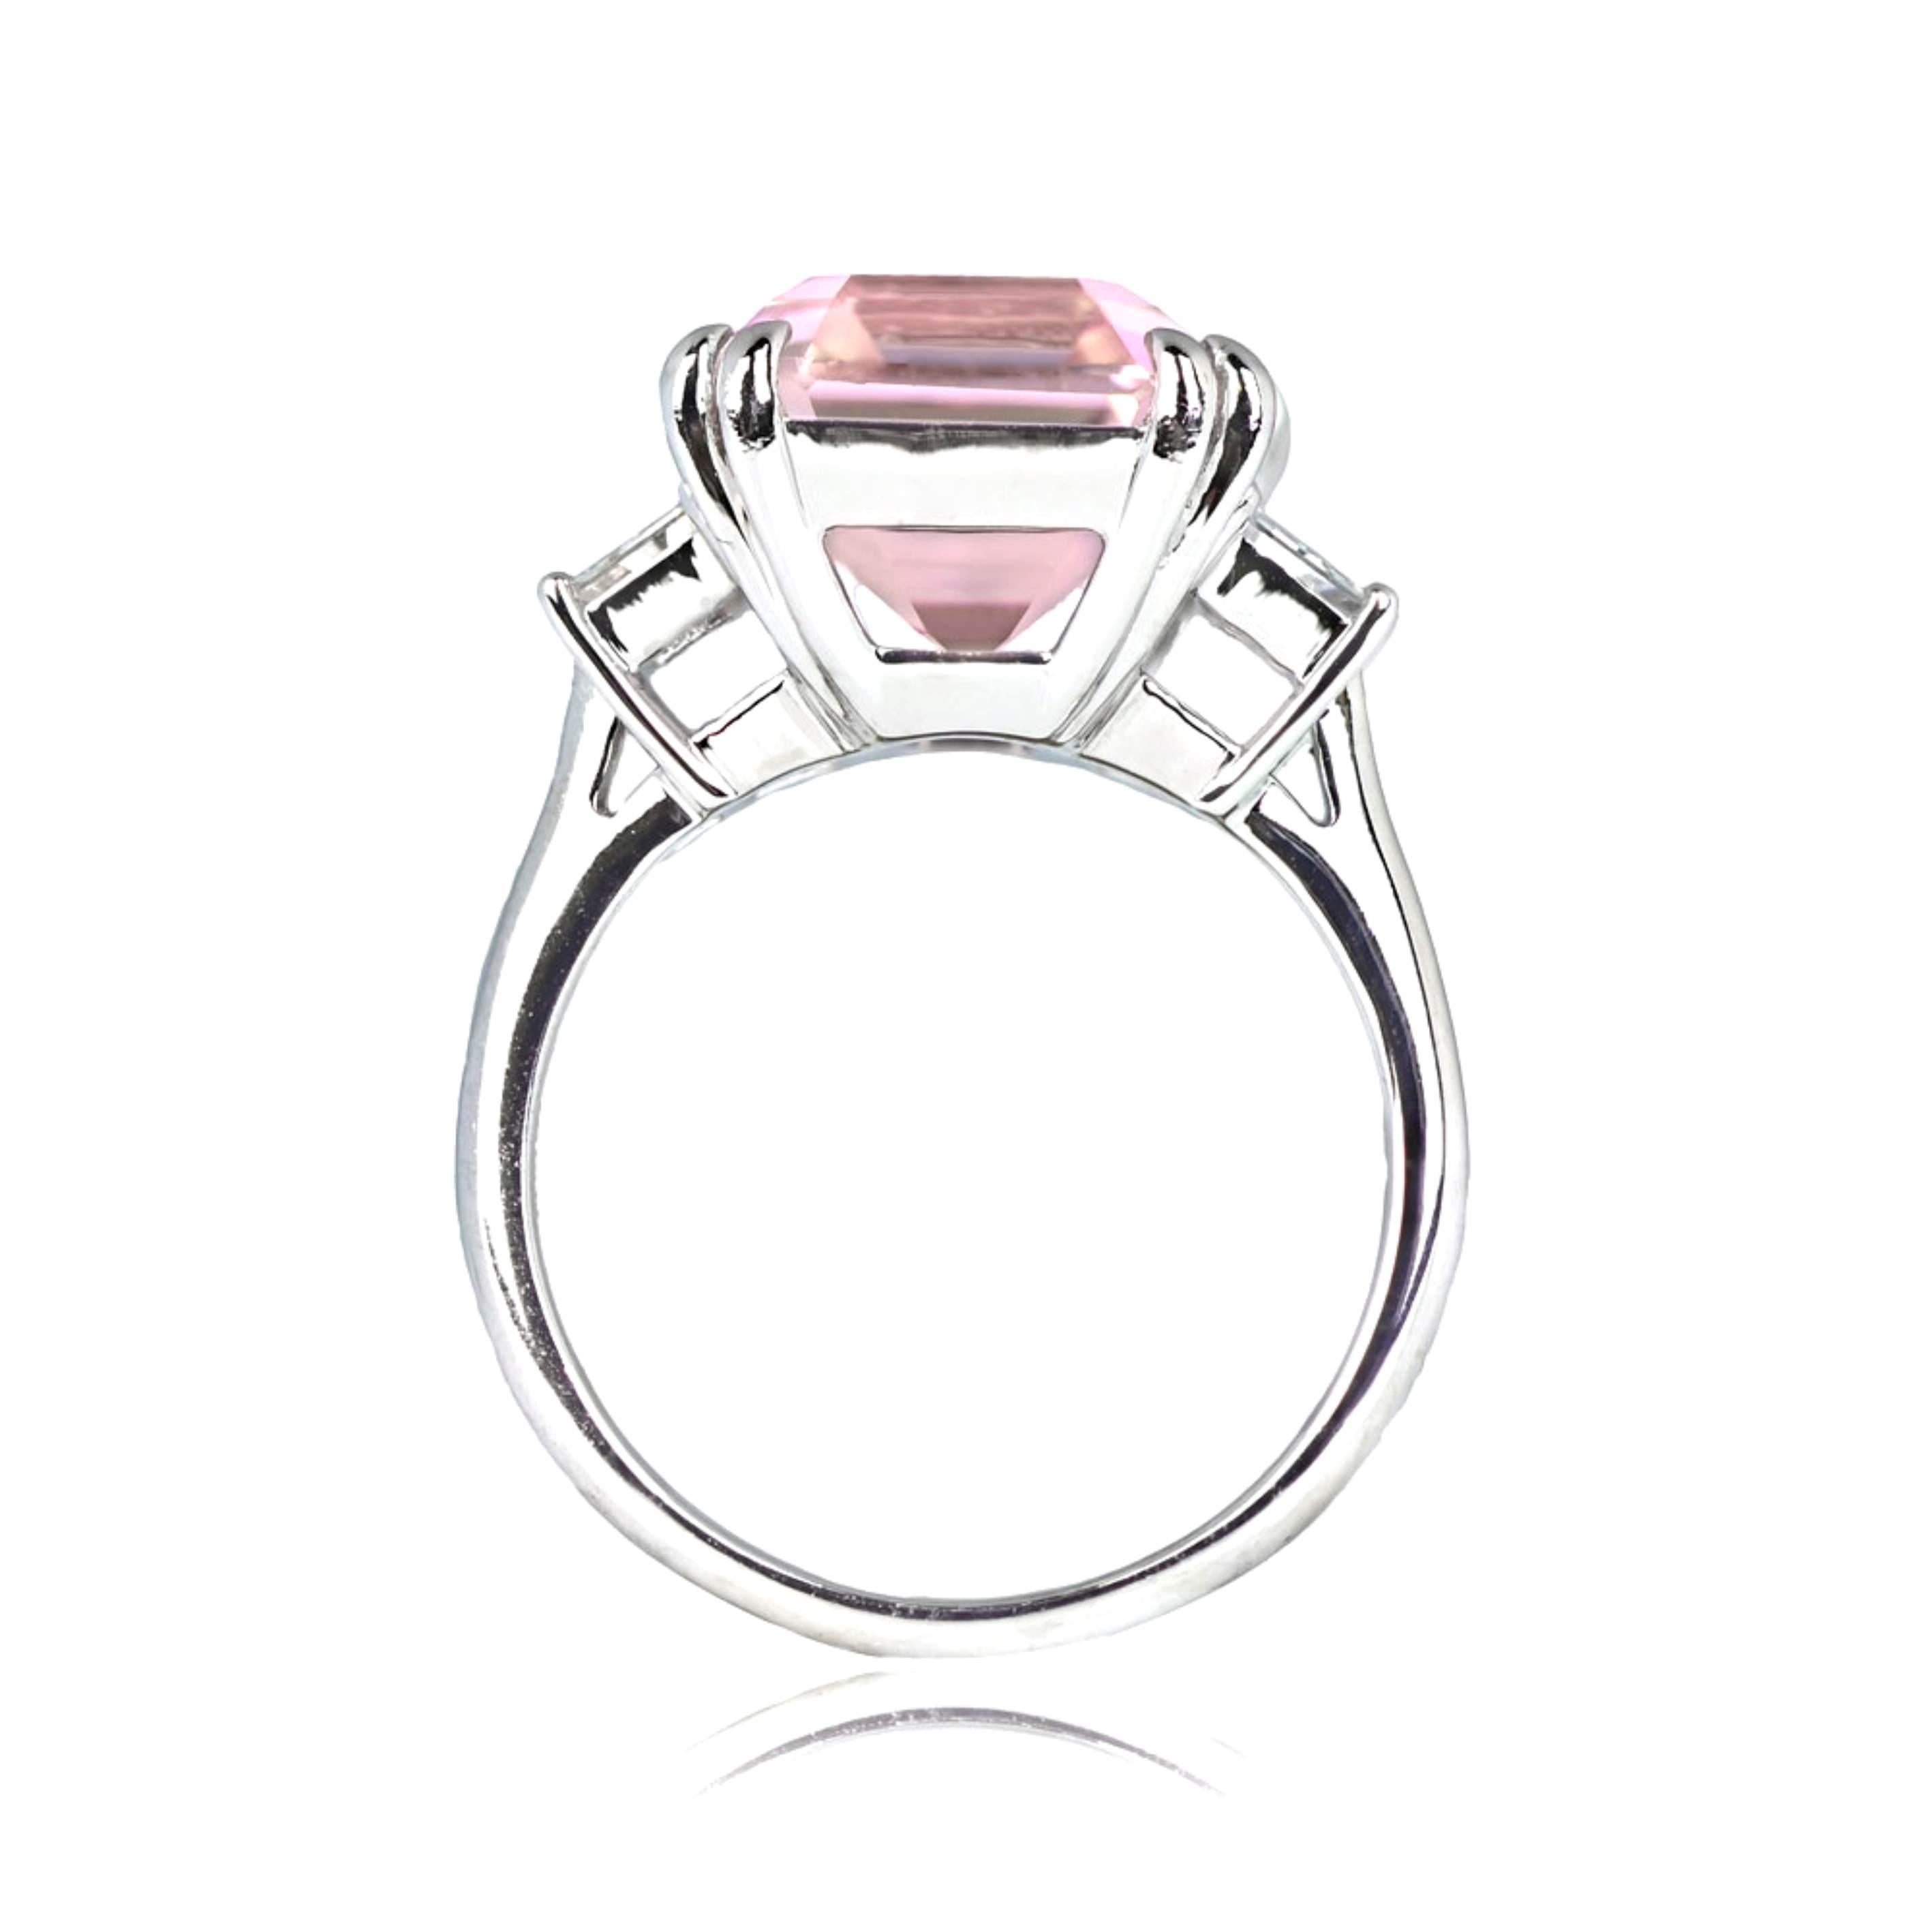 A stunning gemstone and platinum ring showcases a prong-set, breathtaking 9.00-carat natural kunzite with a vivid pink hue and remarkable clarity. The center stone is flanked by a pair of bezel-set trapezoid cut diamonds on the shoulders, boasting a